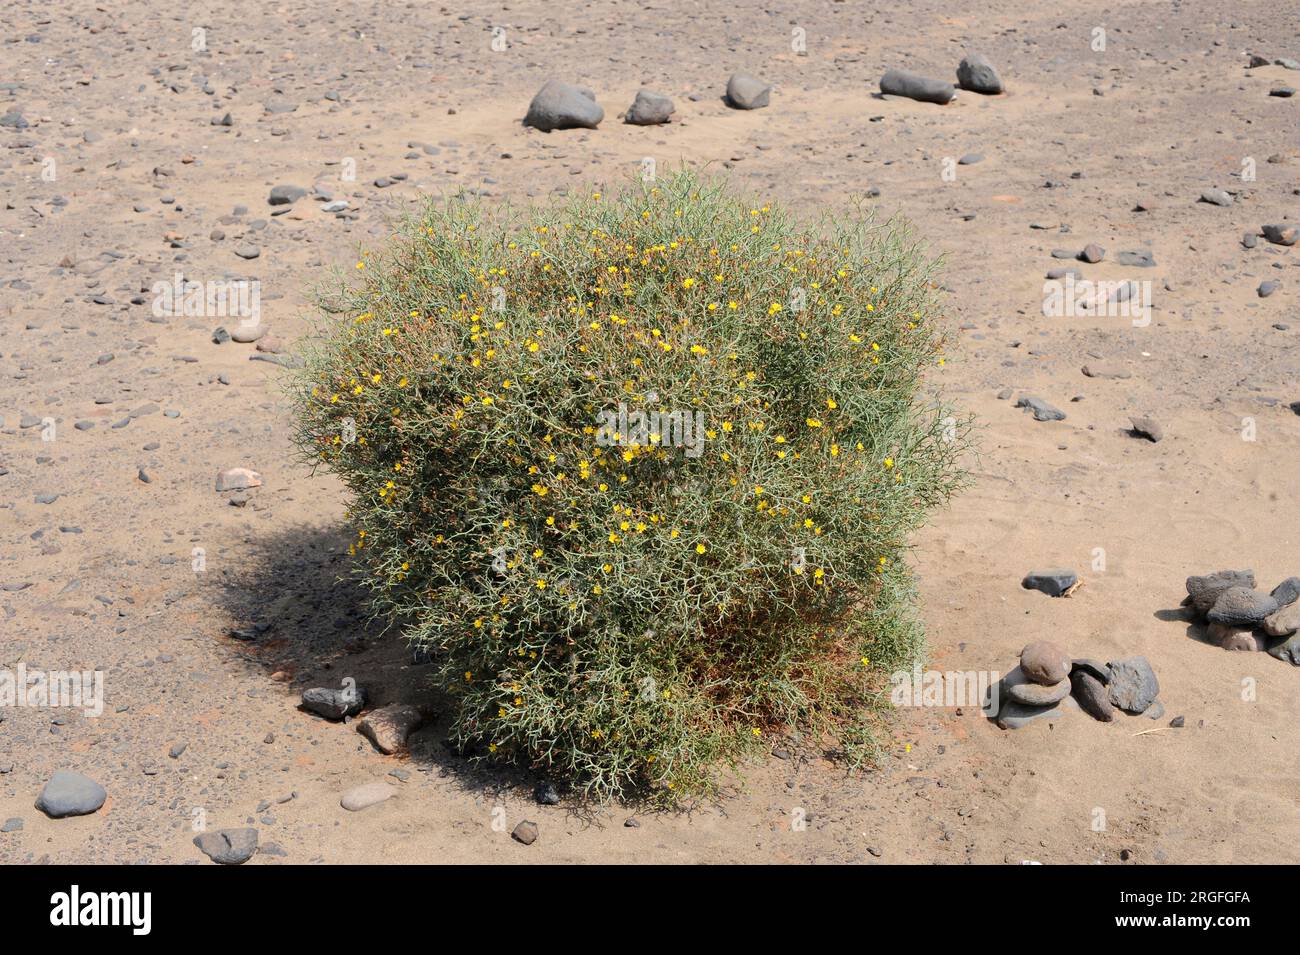 Aulaga, cardaviejo or rascaviejas (Launaea arborescens) is a dense and prickly shrub native of Canary Islands, northwest Africa and southeast Spain. T Stock Photo